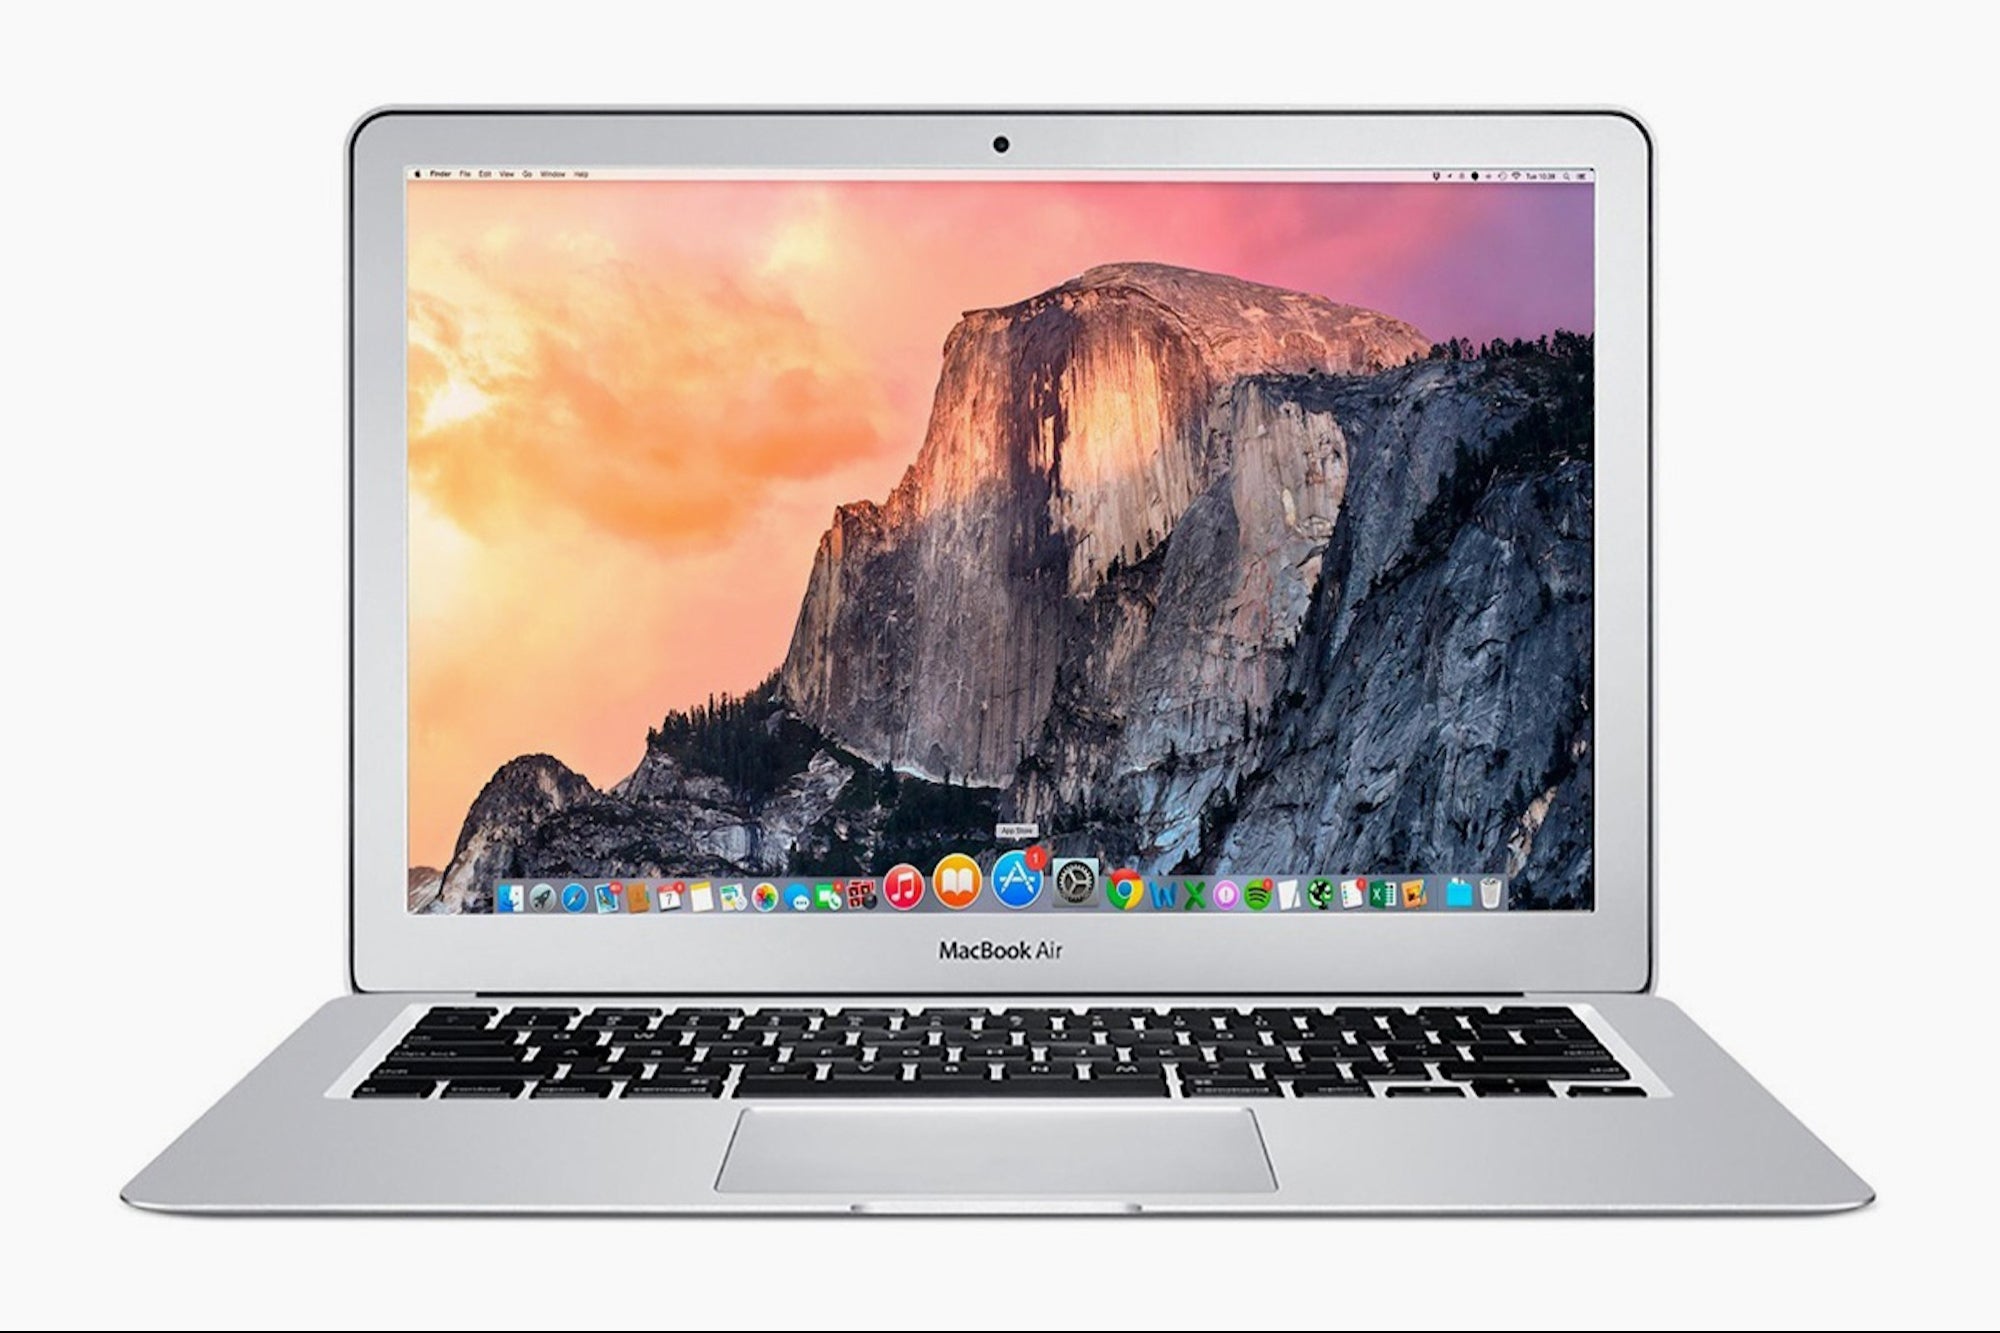 Get A Refurbished 2017 MacBook Air For Only $369.99